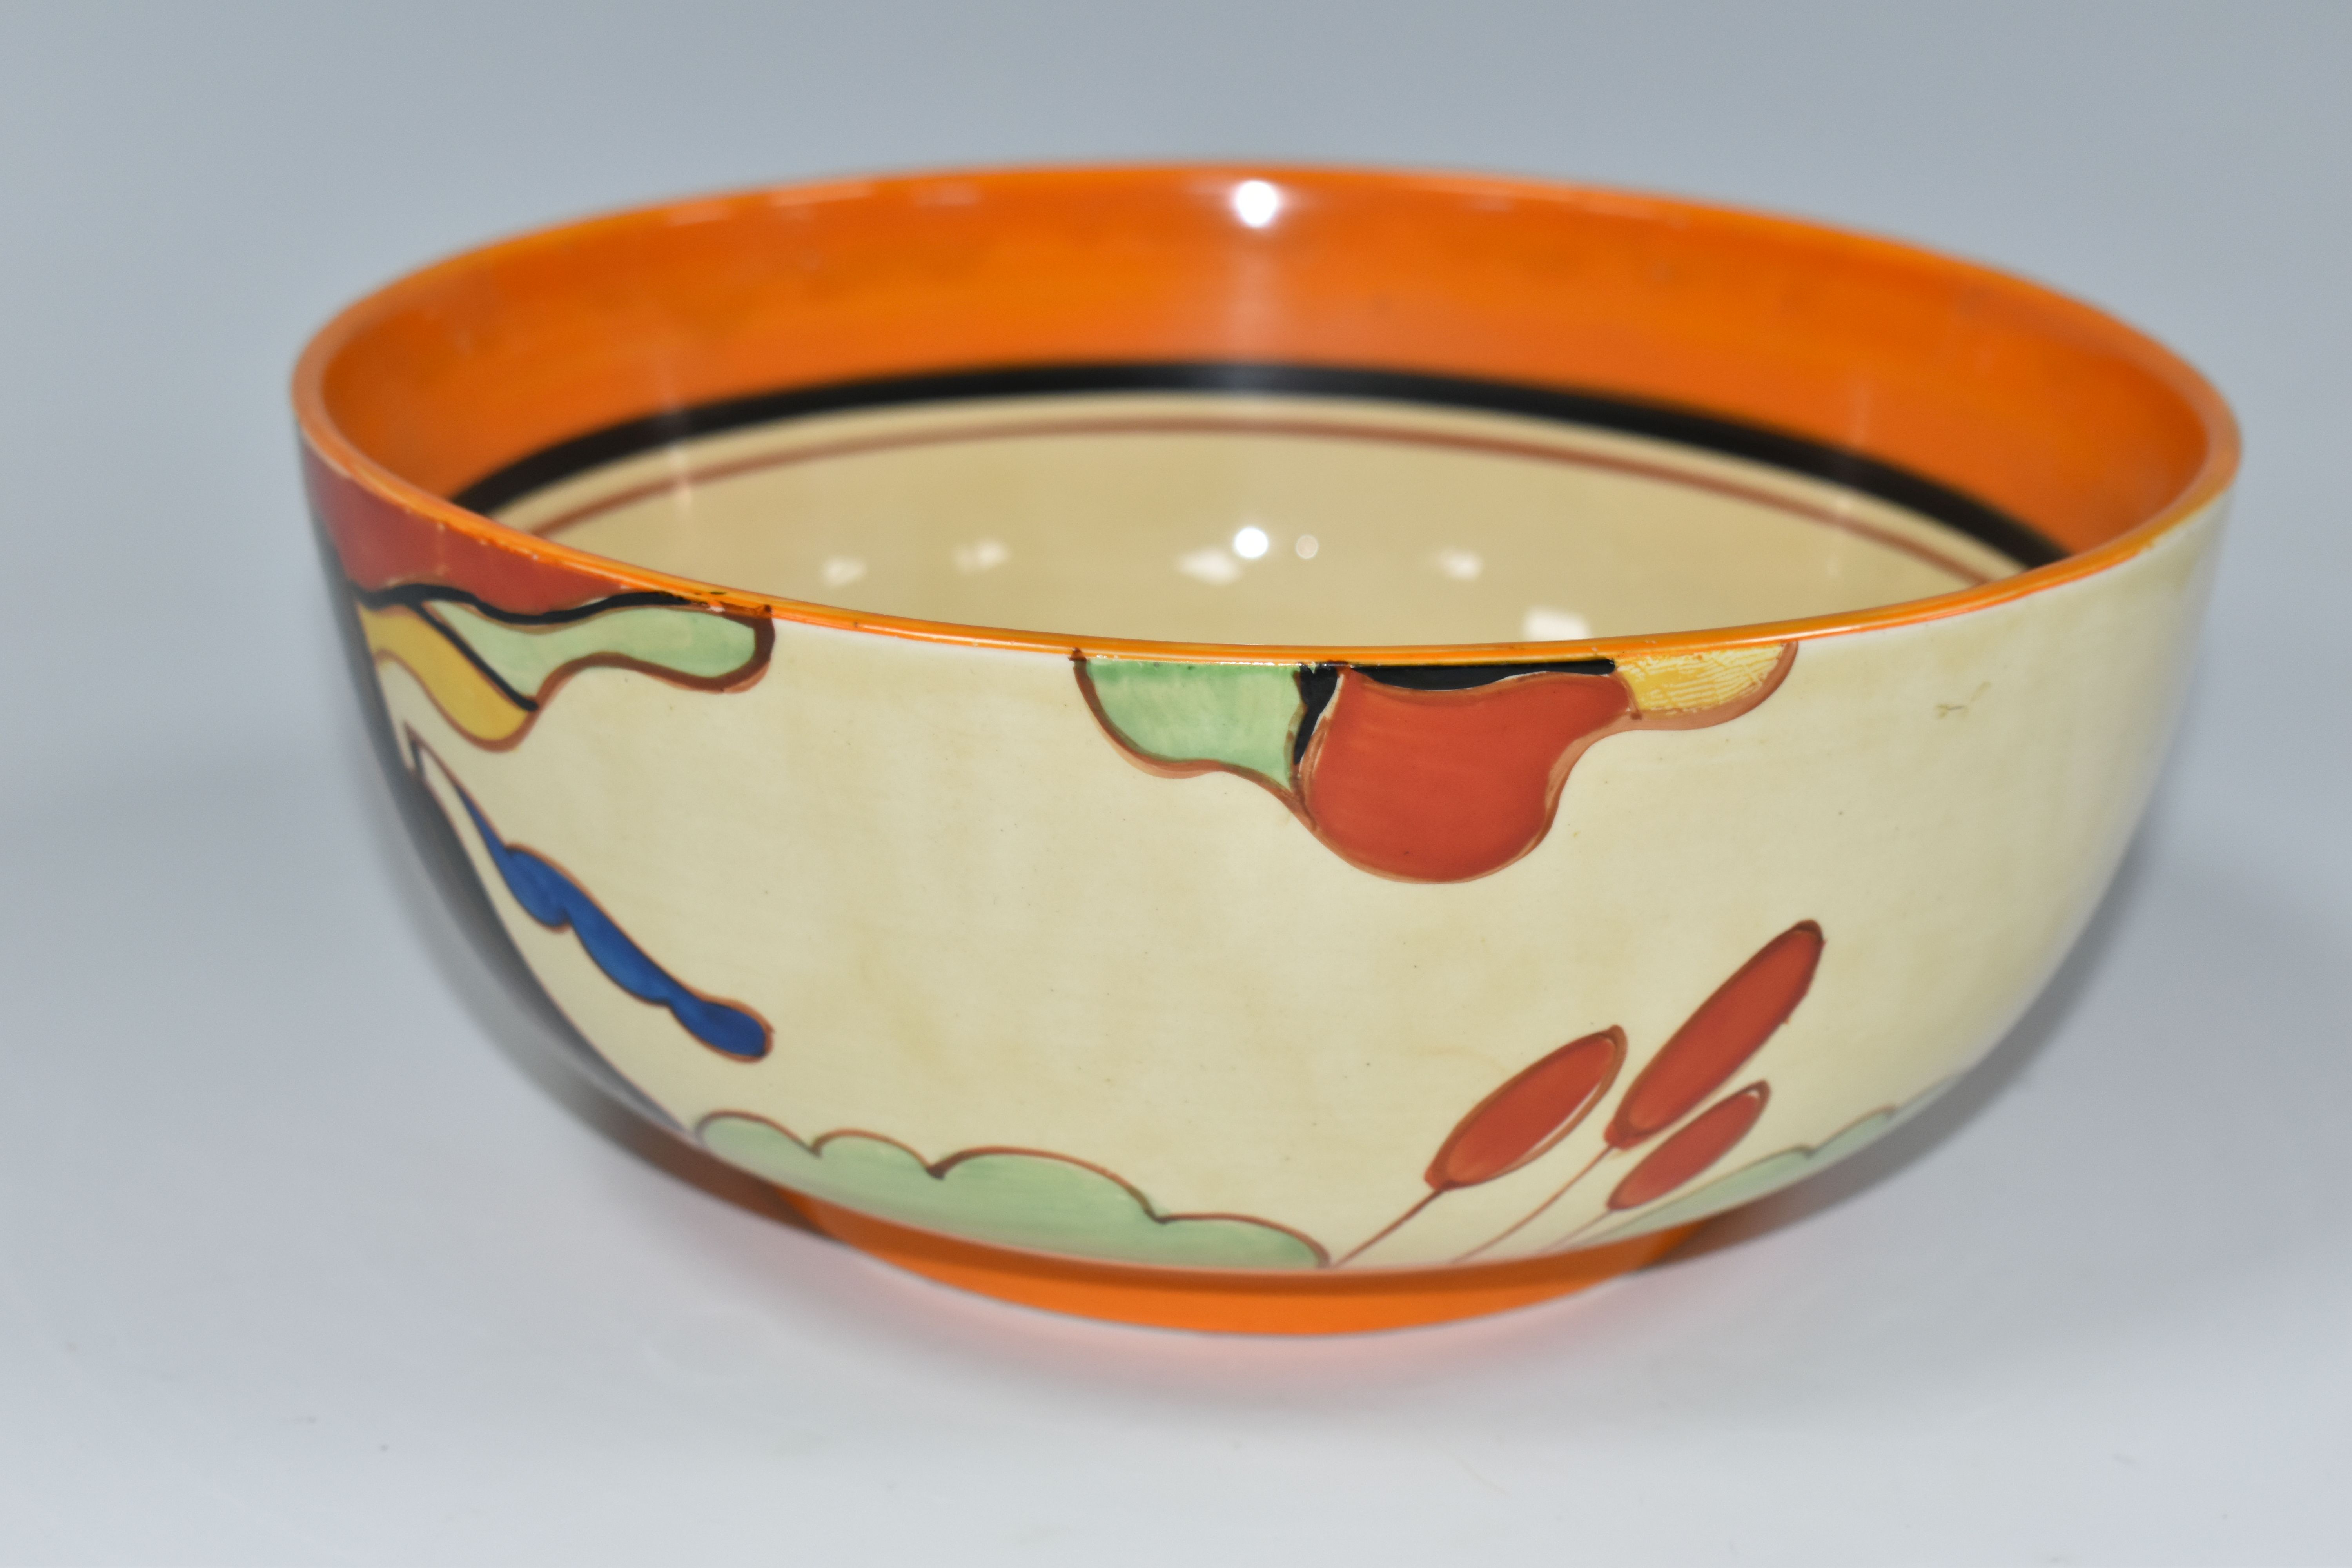 A CLARICE CLIFF FANTASQUE 'ORANGE HOUSE' PATTERN BOWL, painted with two orange houses in a fantasy - Image 2 of 5